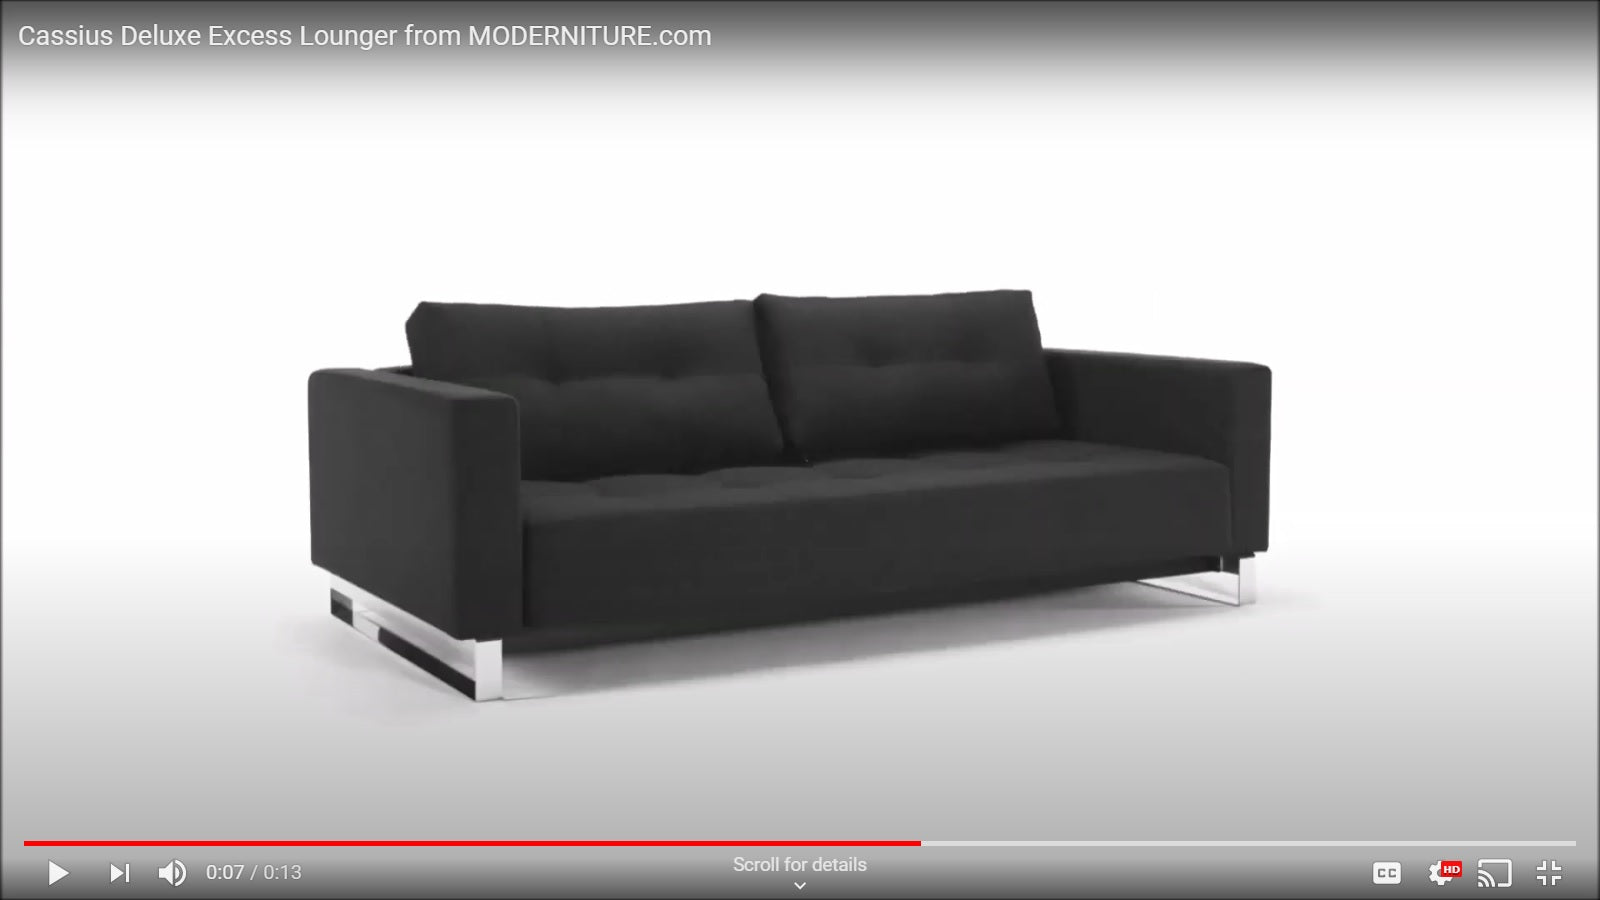 Cassius Deluxe Excess Lounger Sofabed Video